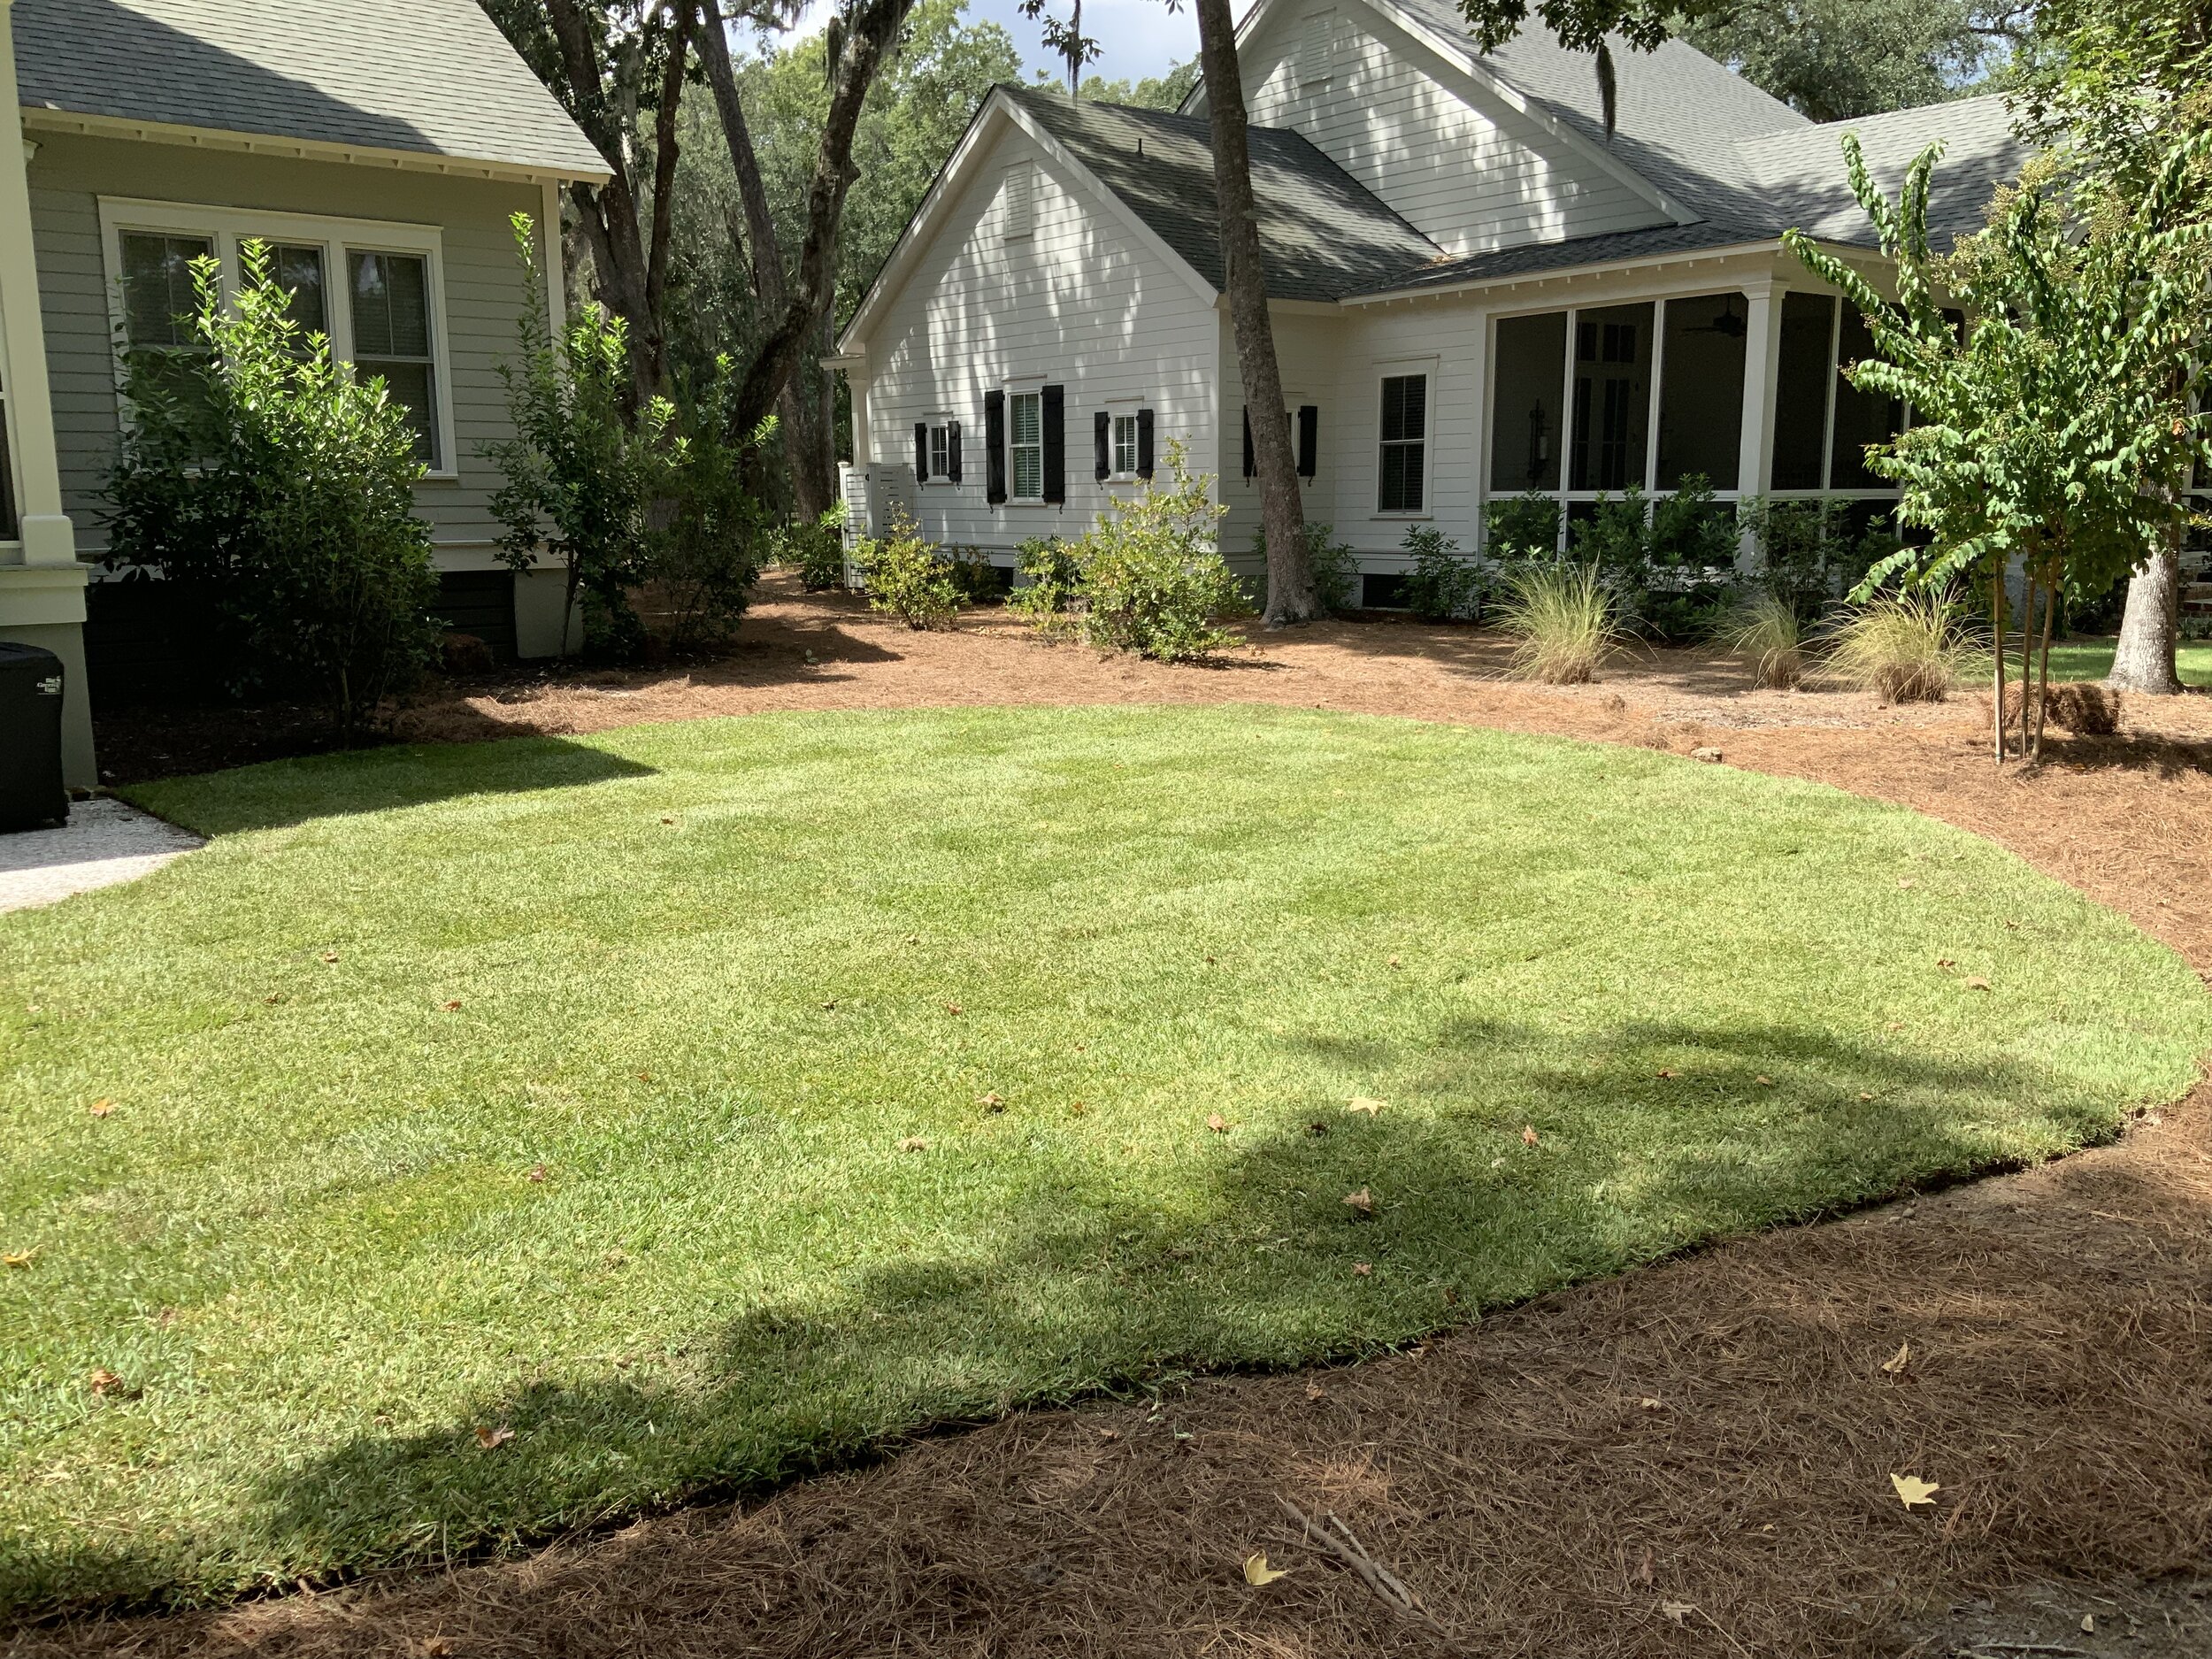 NEW SOD AFTER.jpeg